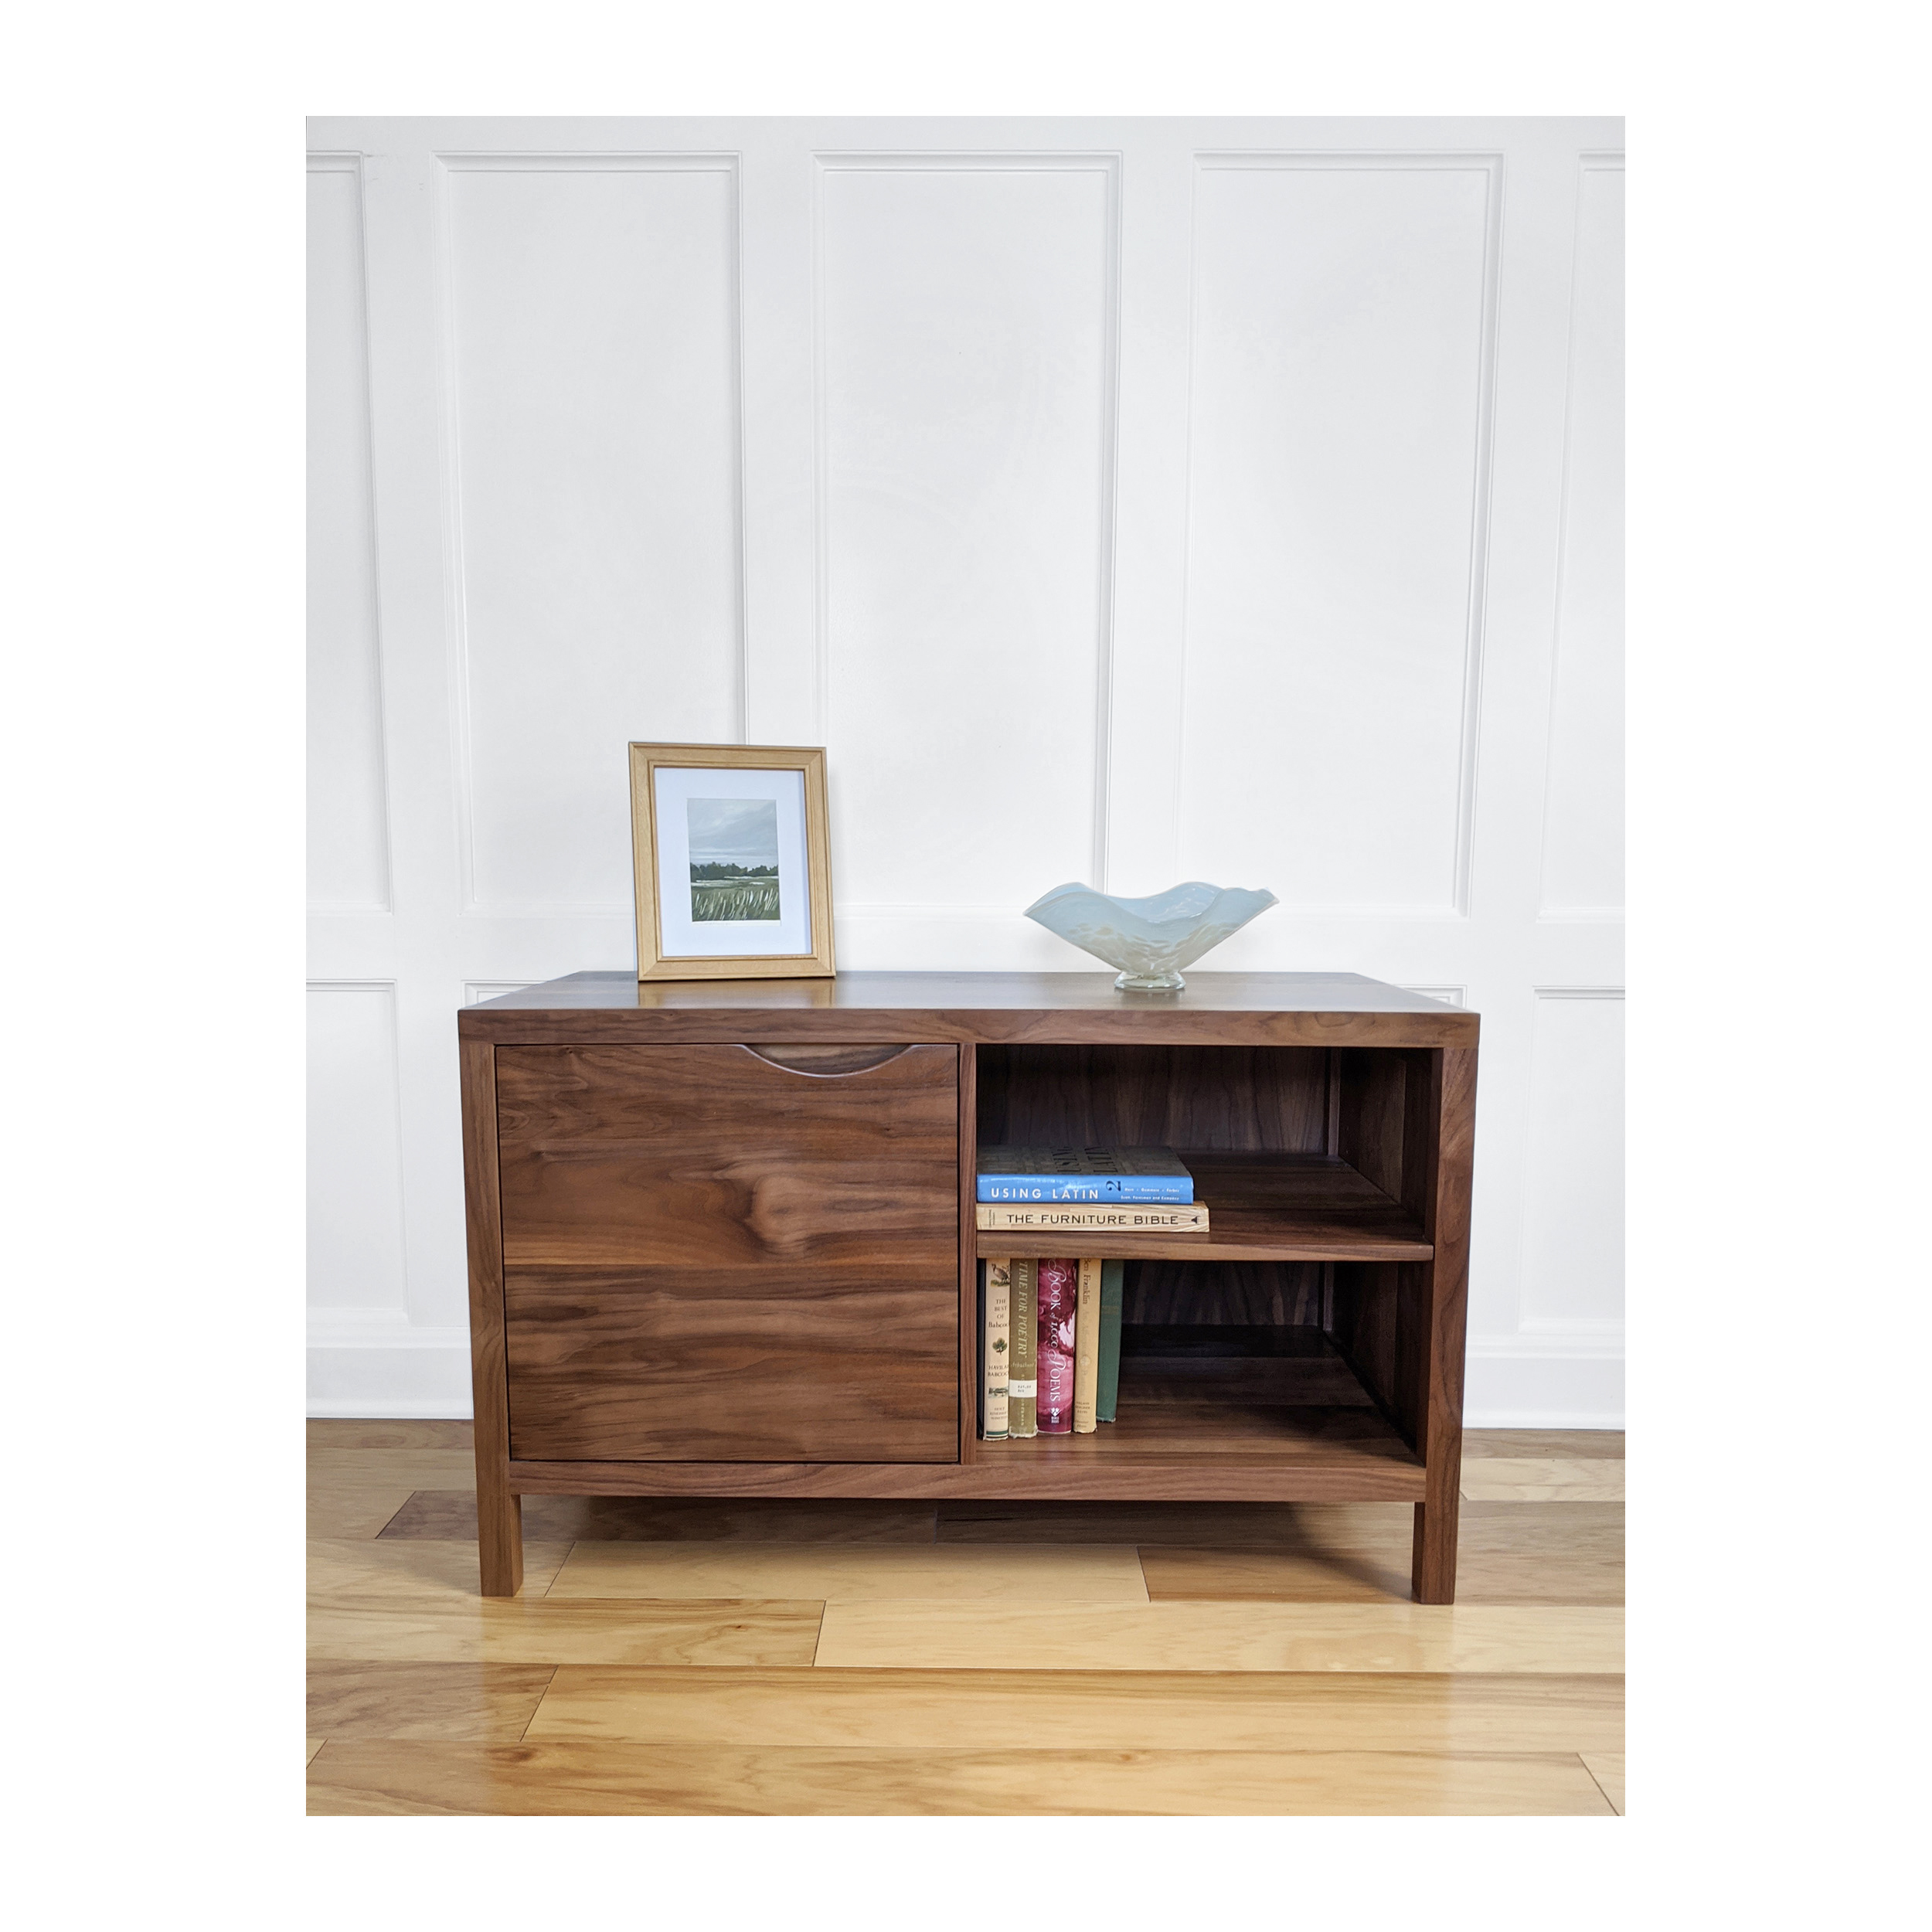 Series 353 Media Console With One Door At 42″ In Width